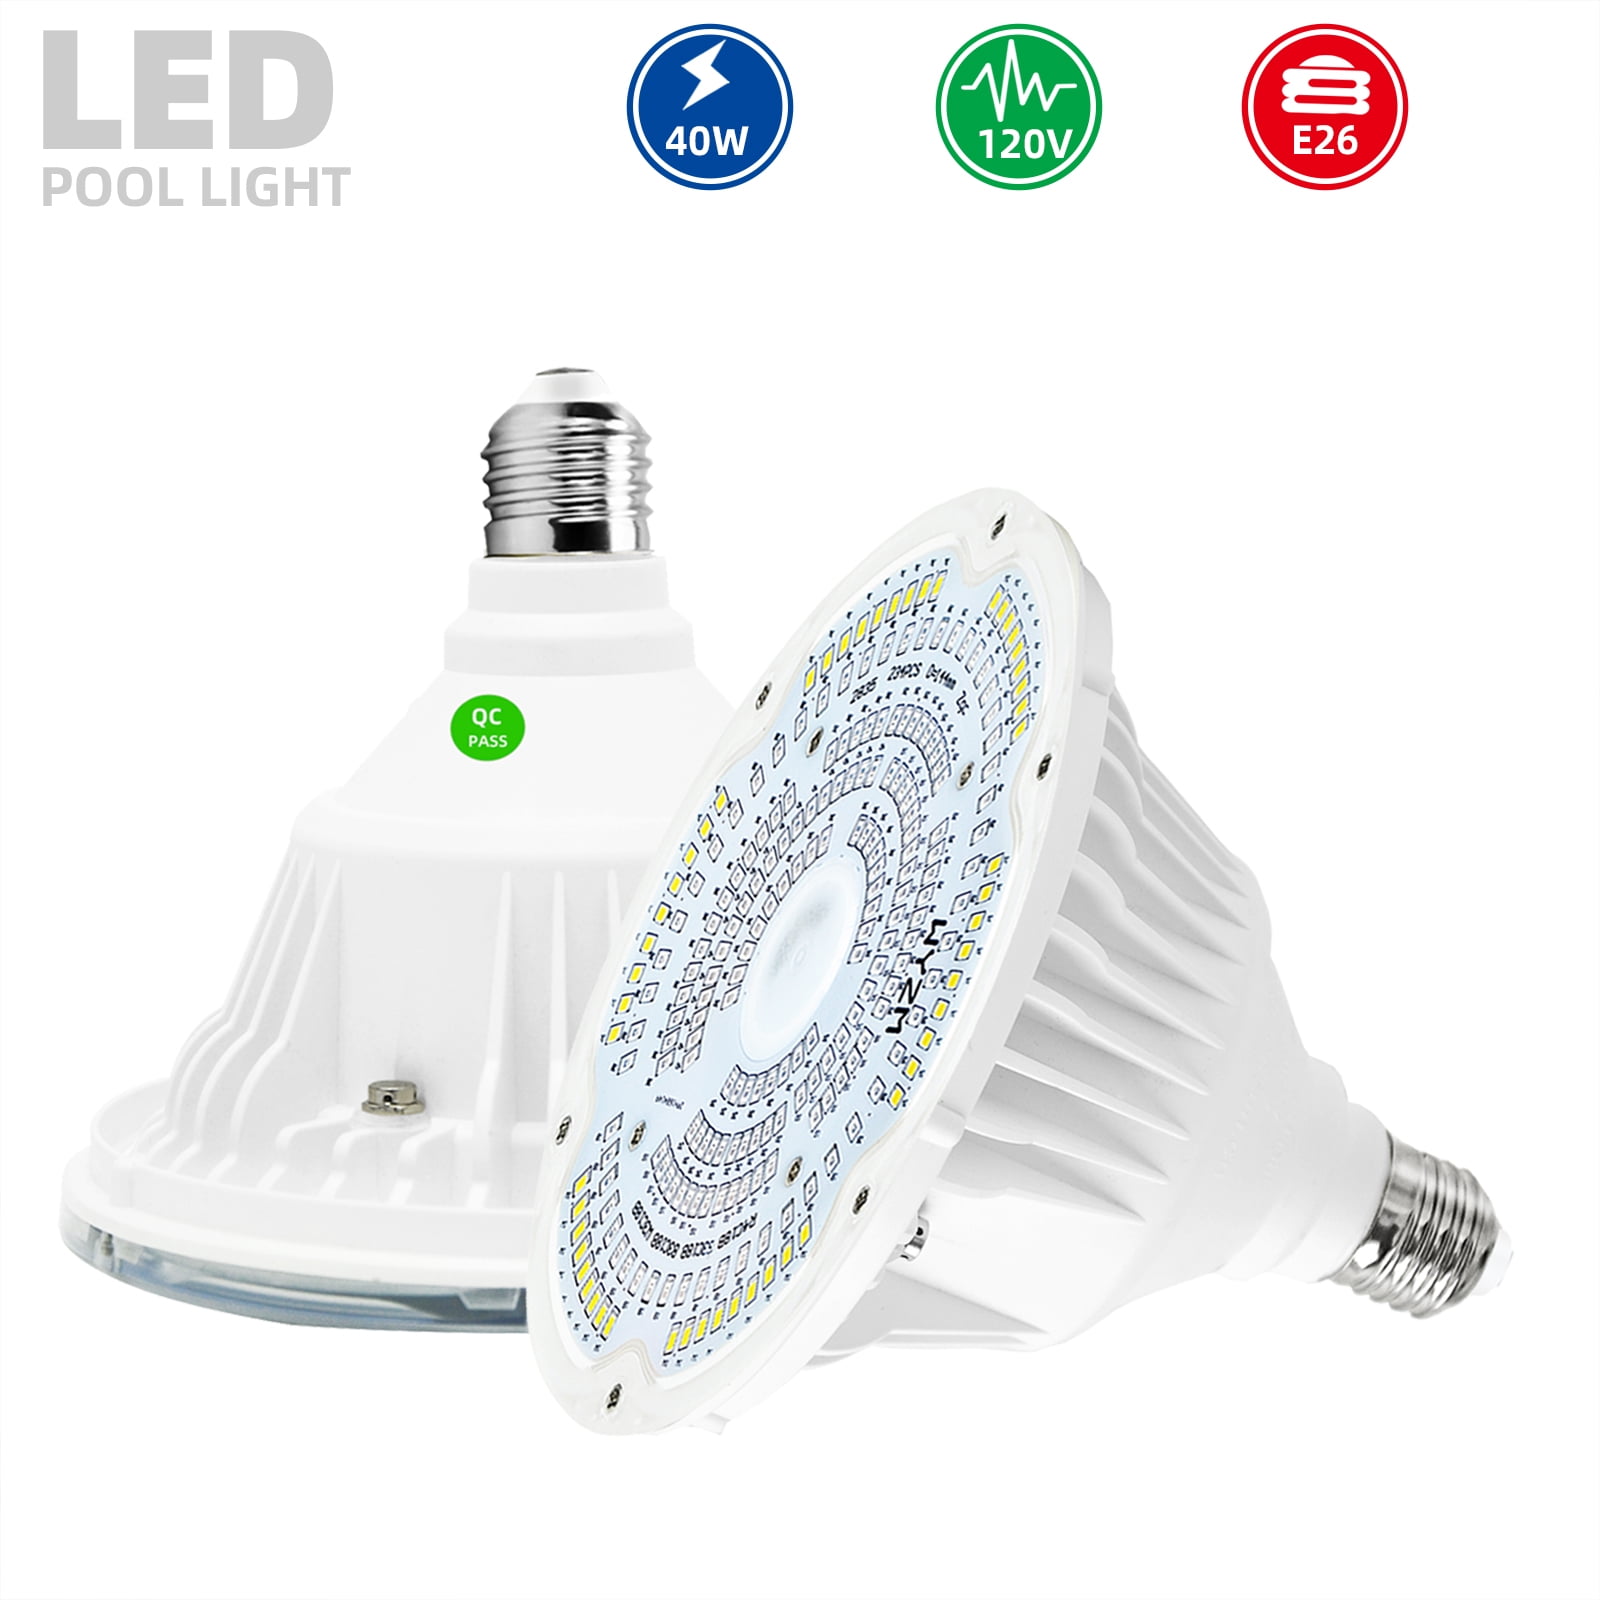 LED Pool Light Bulb 40W 120Volt Color Changing for Pentair Hayward Inground Pool 